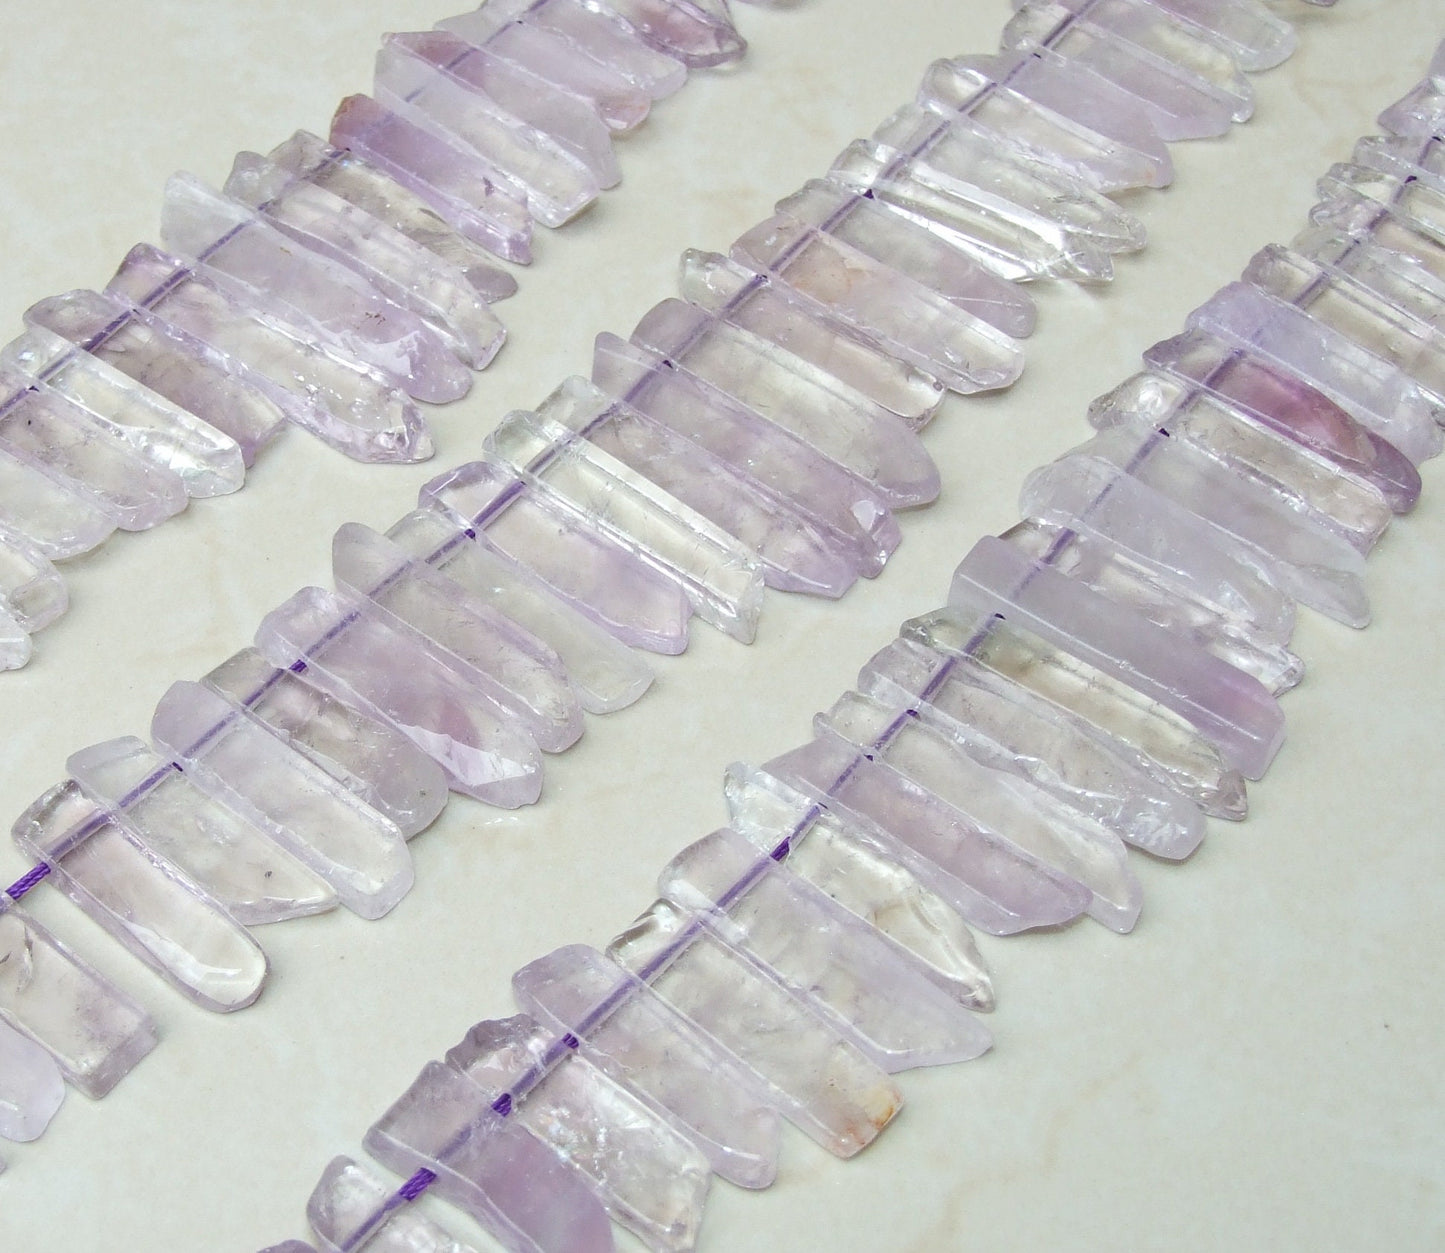 Amethyst Beads, Polished Natural Amethyst Slice, Amethyst Pendants, Gemstone Beads, Amethyst Points Jewelry, Half Strand - 25mm to 50mm - A1